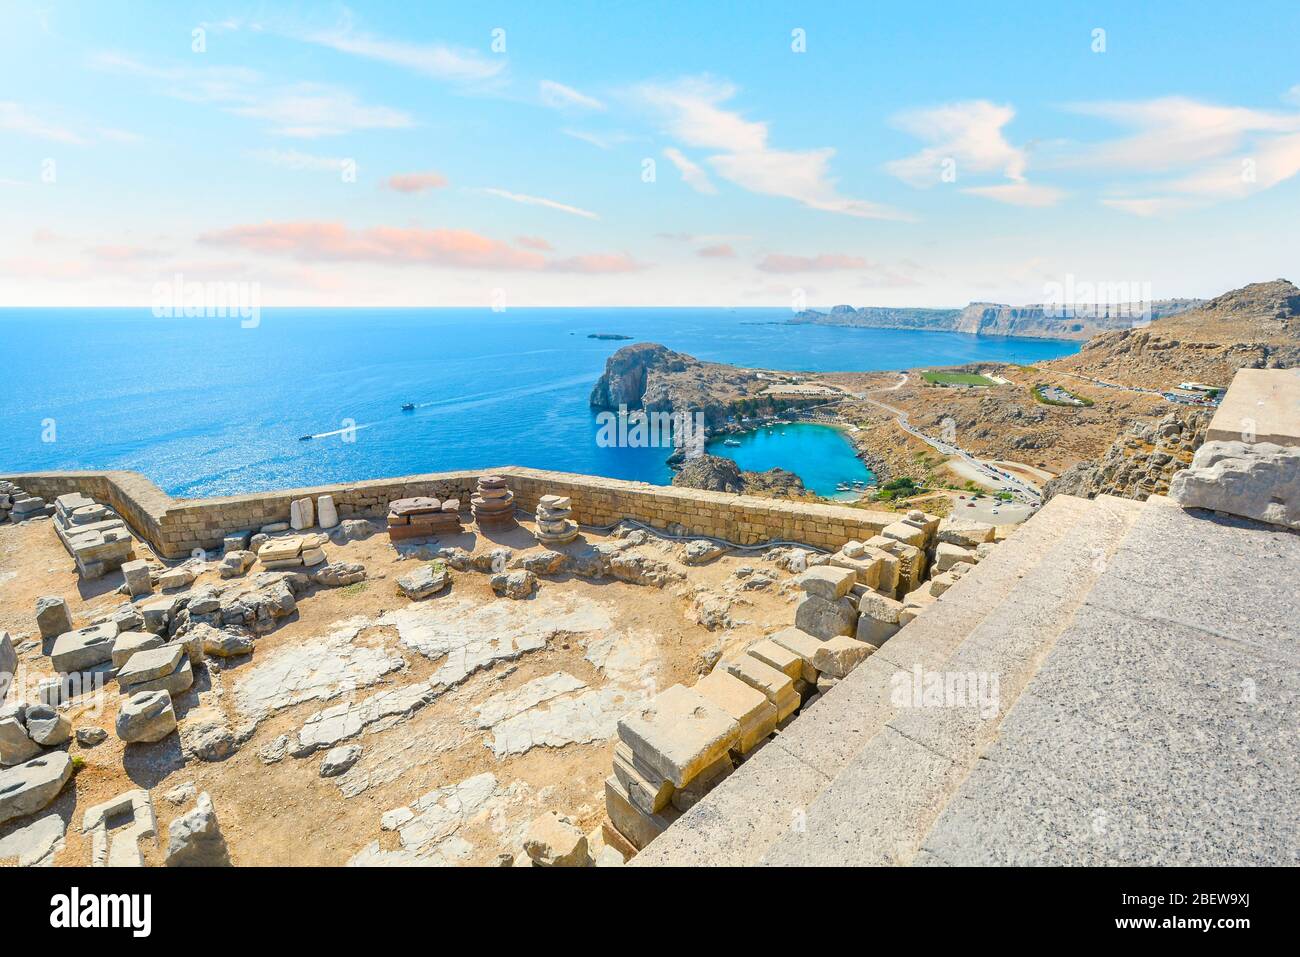 View on the cliffs and the Mediterranean Sea from the Acropolis of